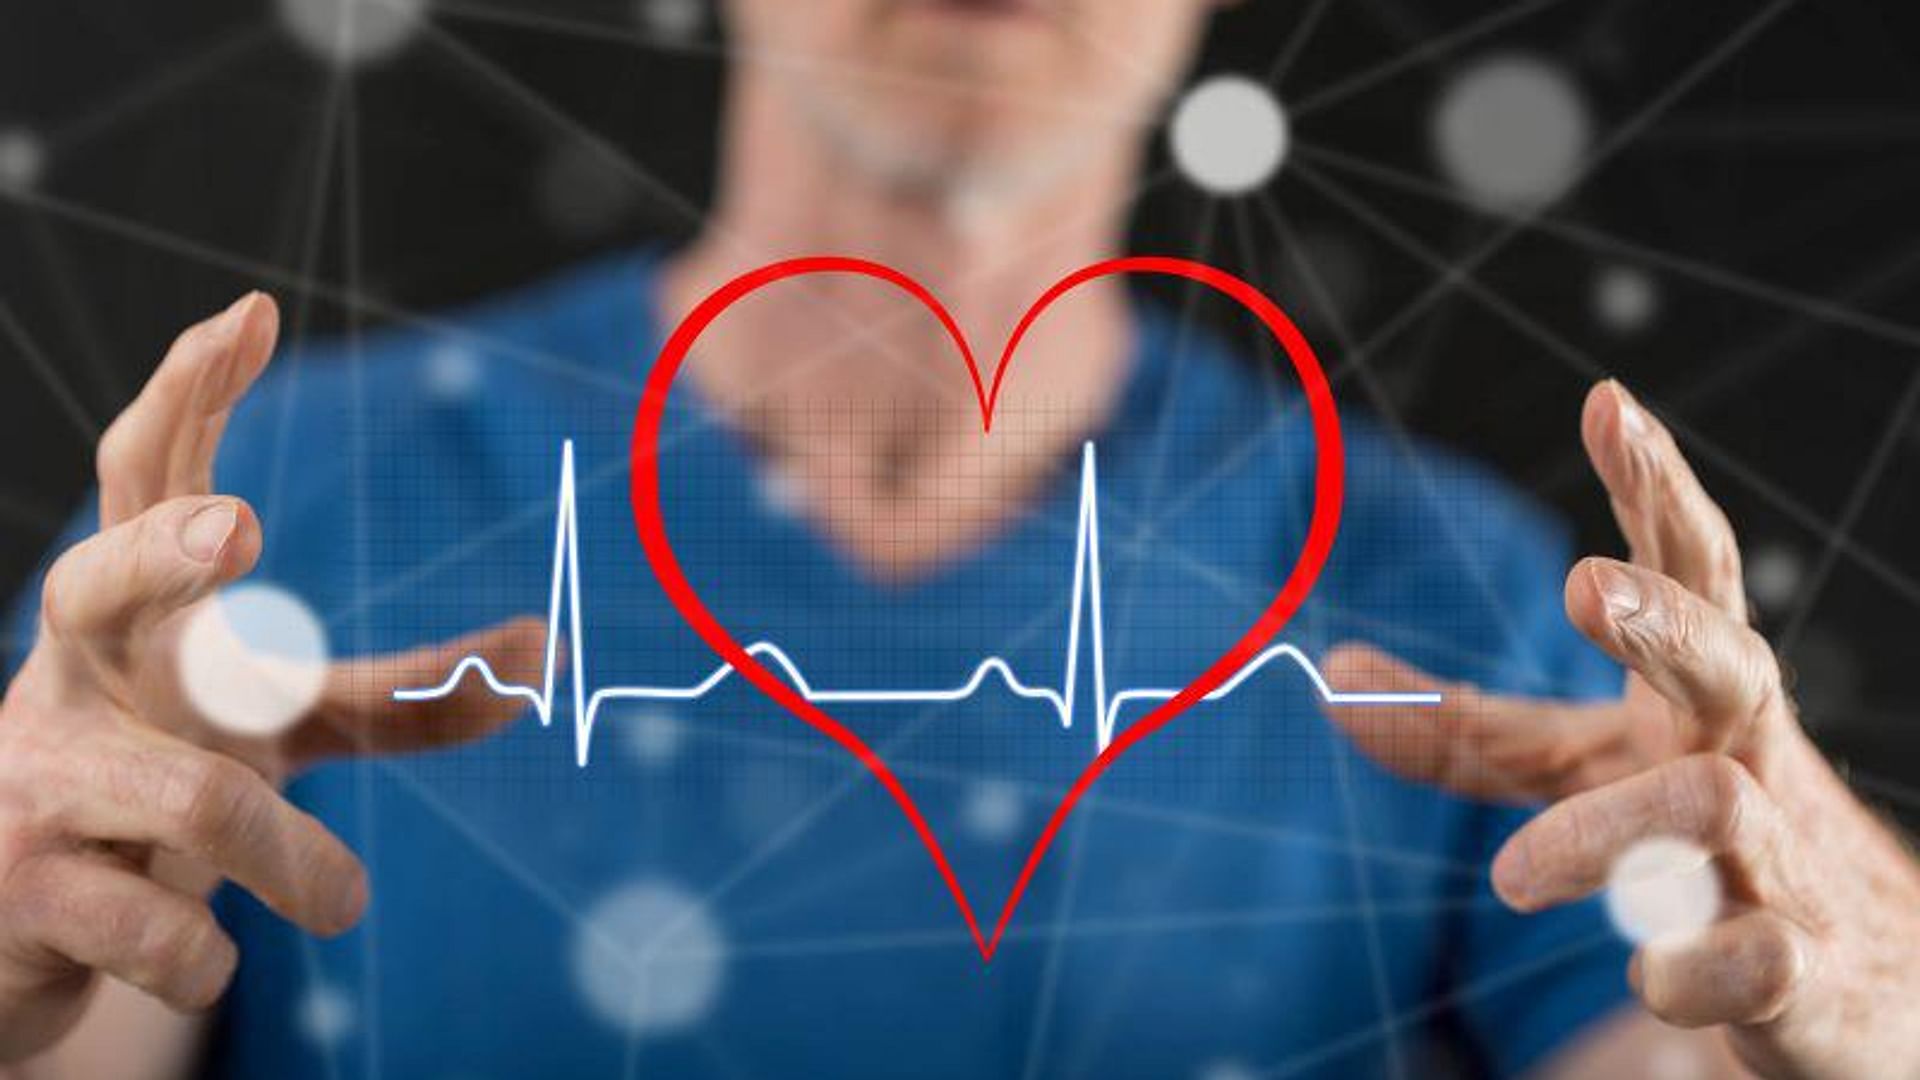 Deep Learning Model Predicts Atrial Fibrillation From Outpatient ECGs - Image